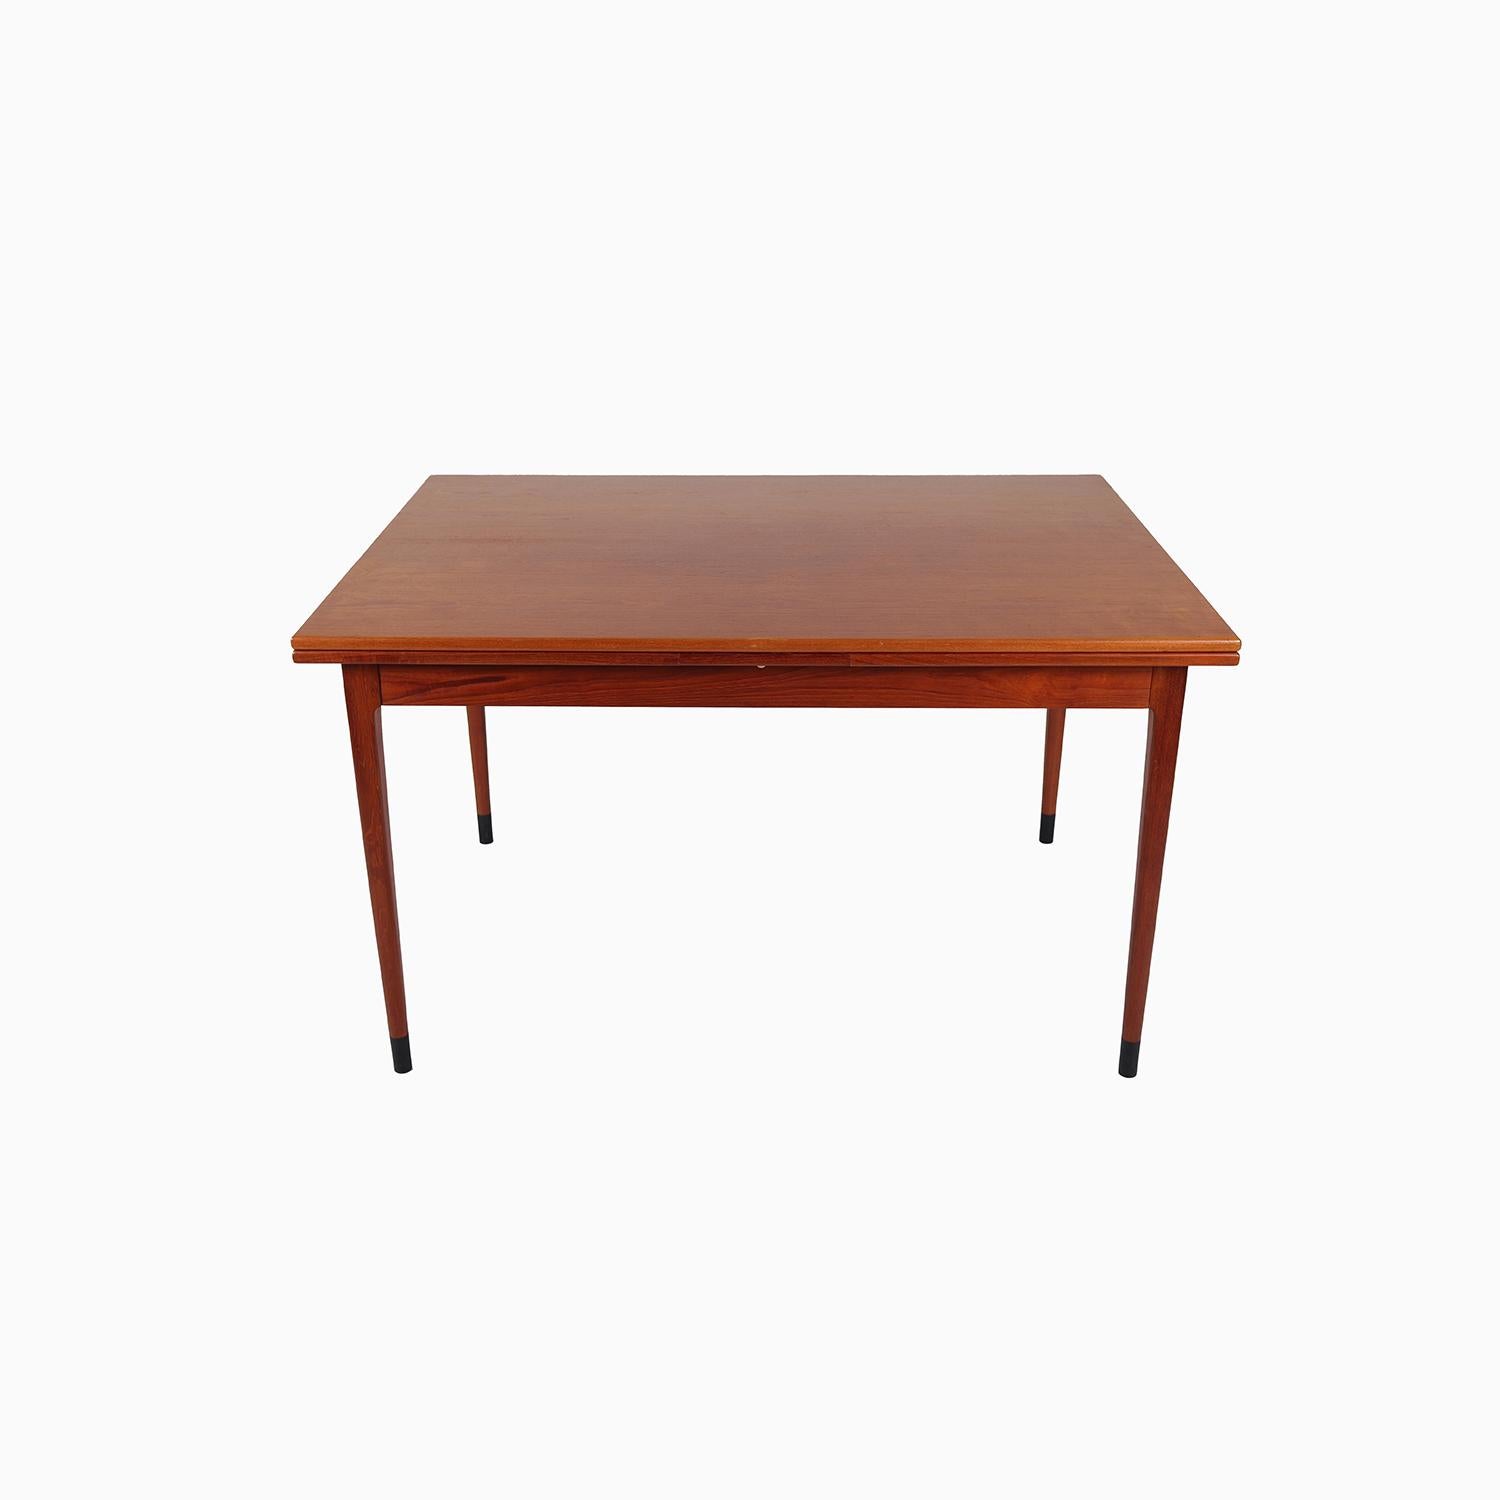 A Danish Modern dining table by the well known Danish manufacturer J.L Møller. Design by N.Ø Møller. Teak with black capped feet. 

Professional, skilled furniture restoration is an integral part of what we do every day. Our goal is to provide